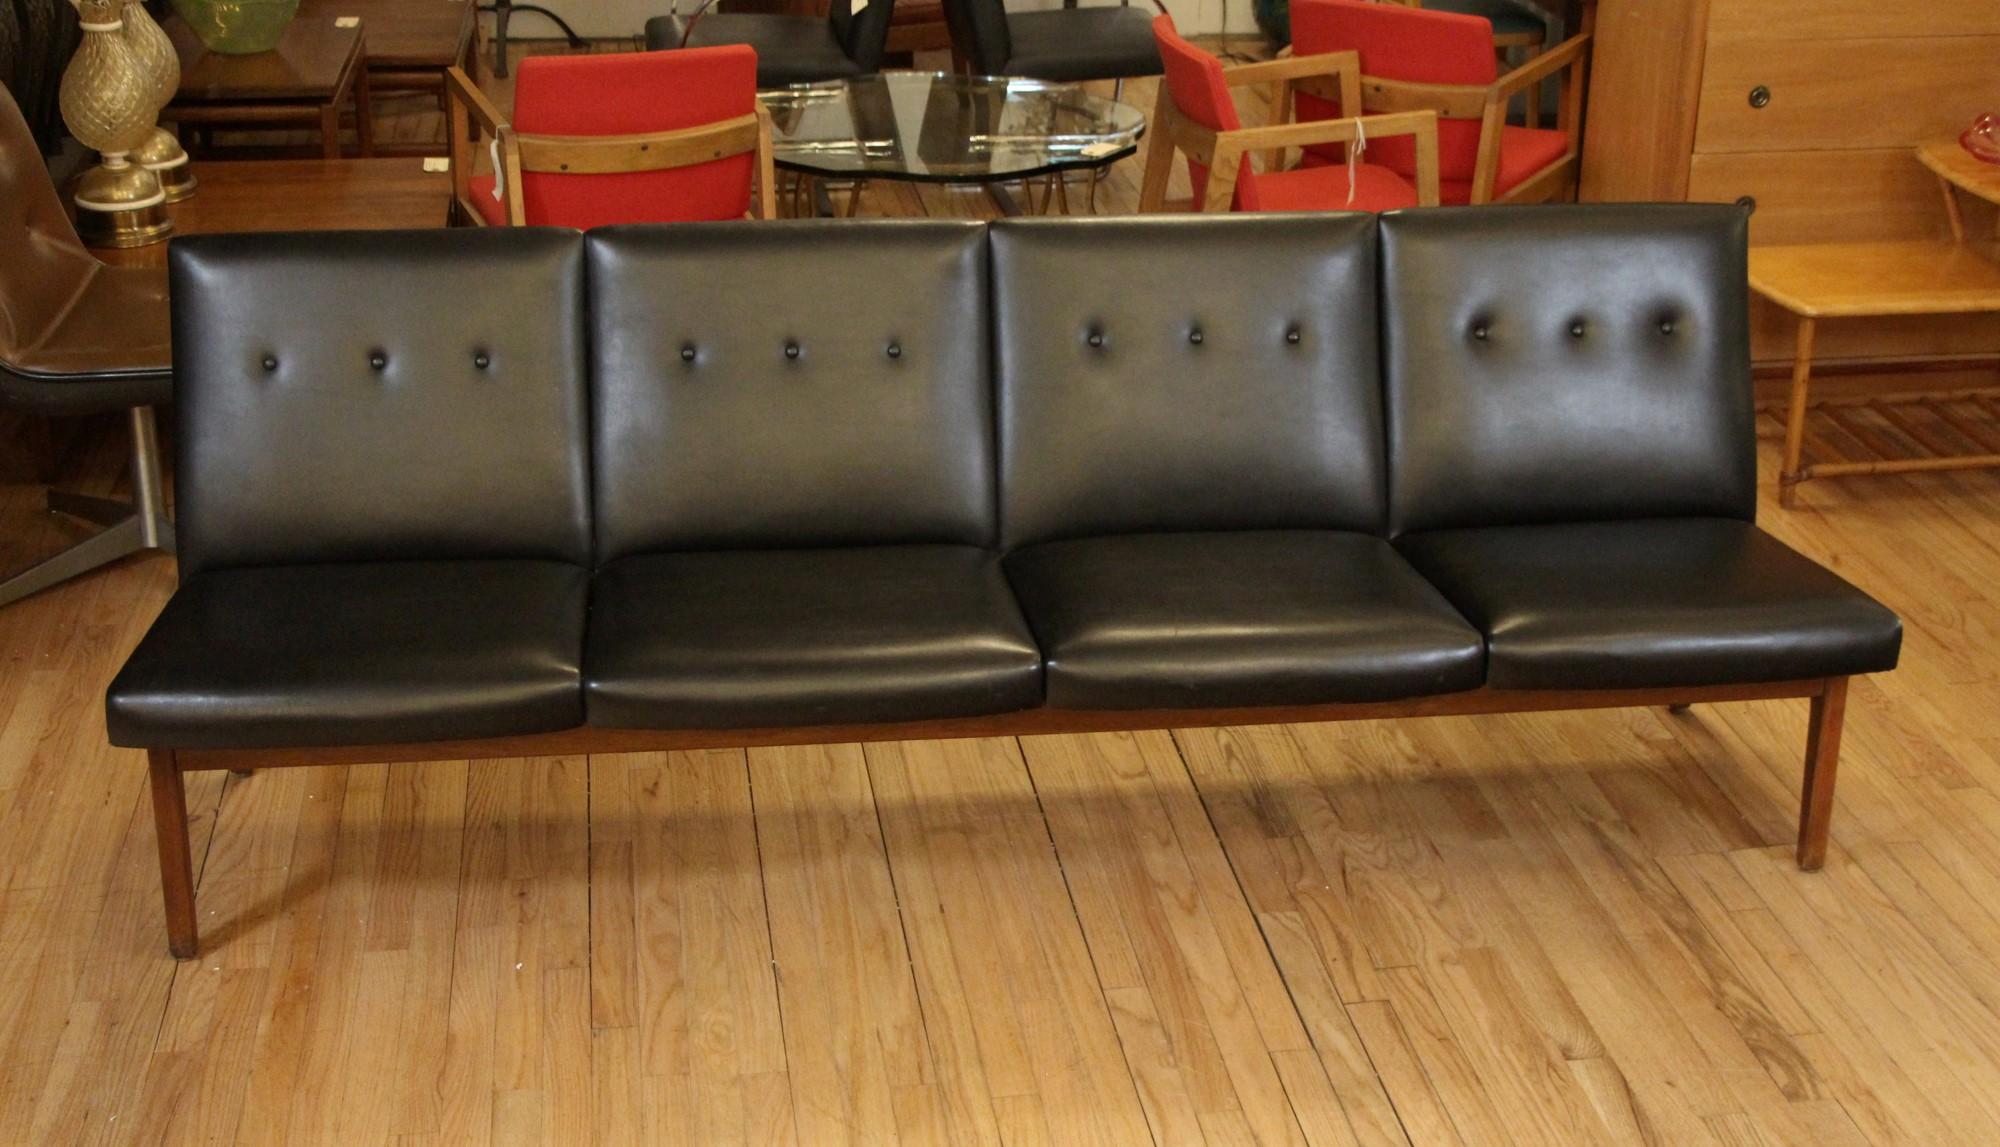 Late 20th Century 4 Seat Black Sofa with Wood Legs, Mid-Century Modern Style with Buttons